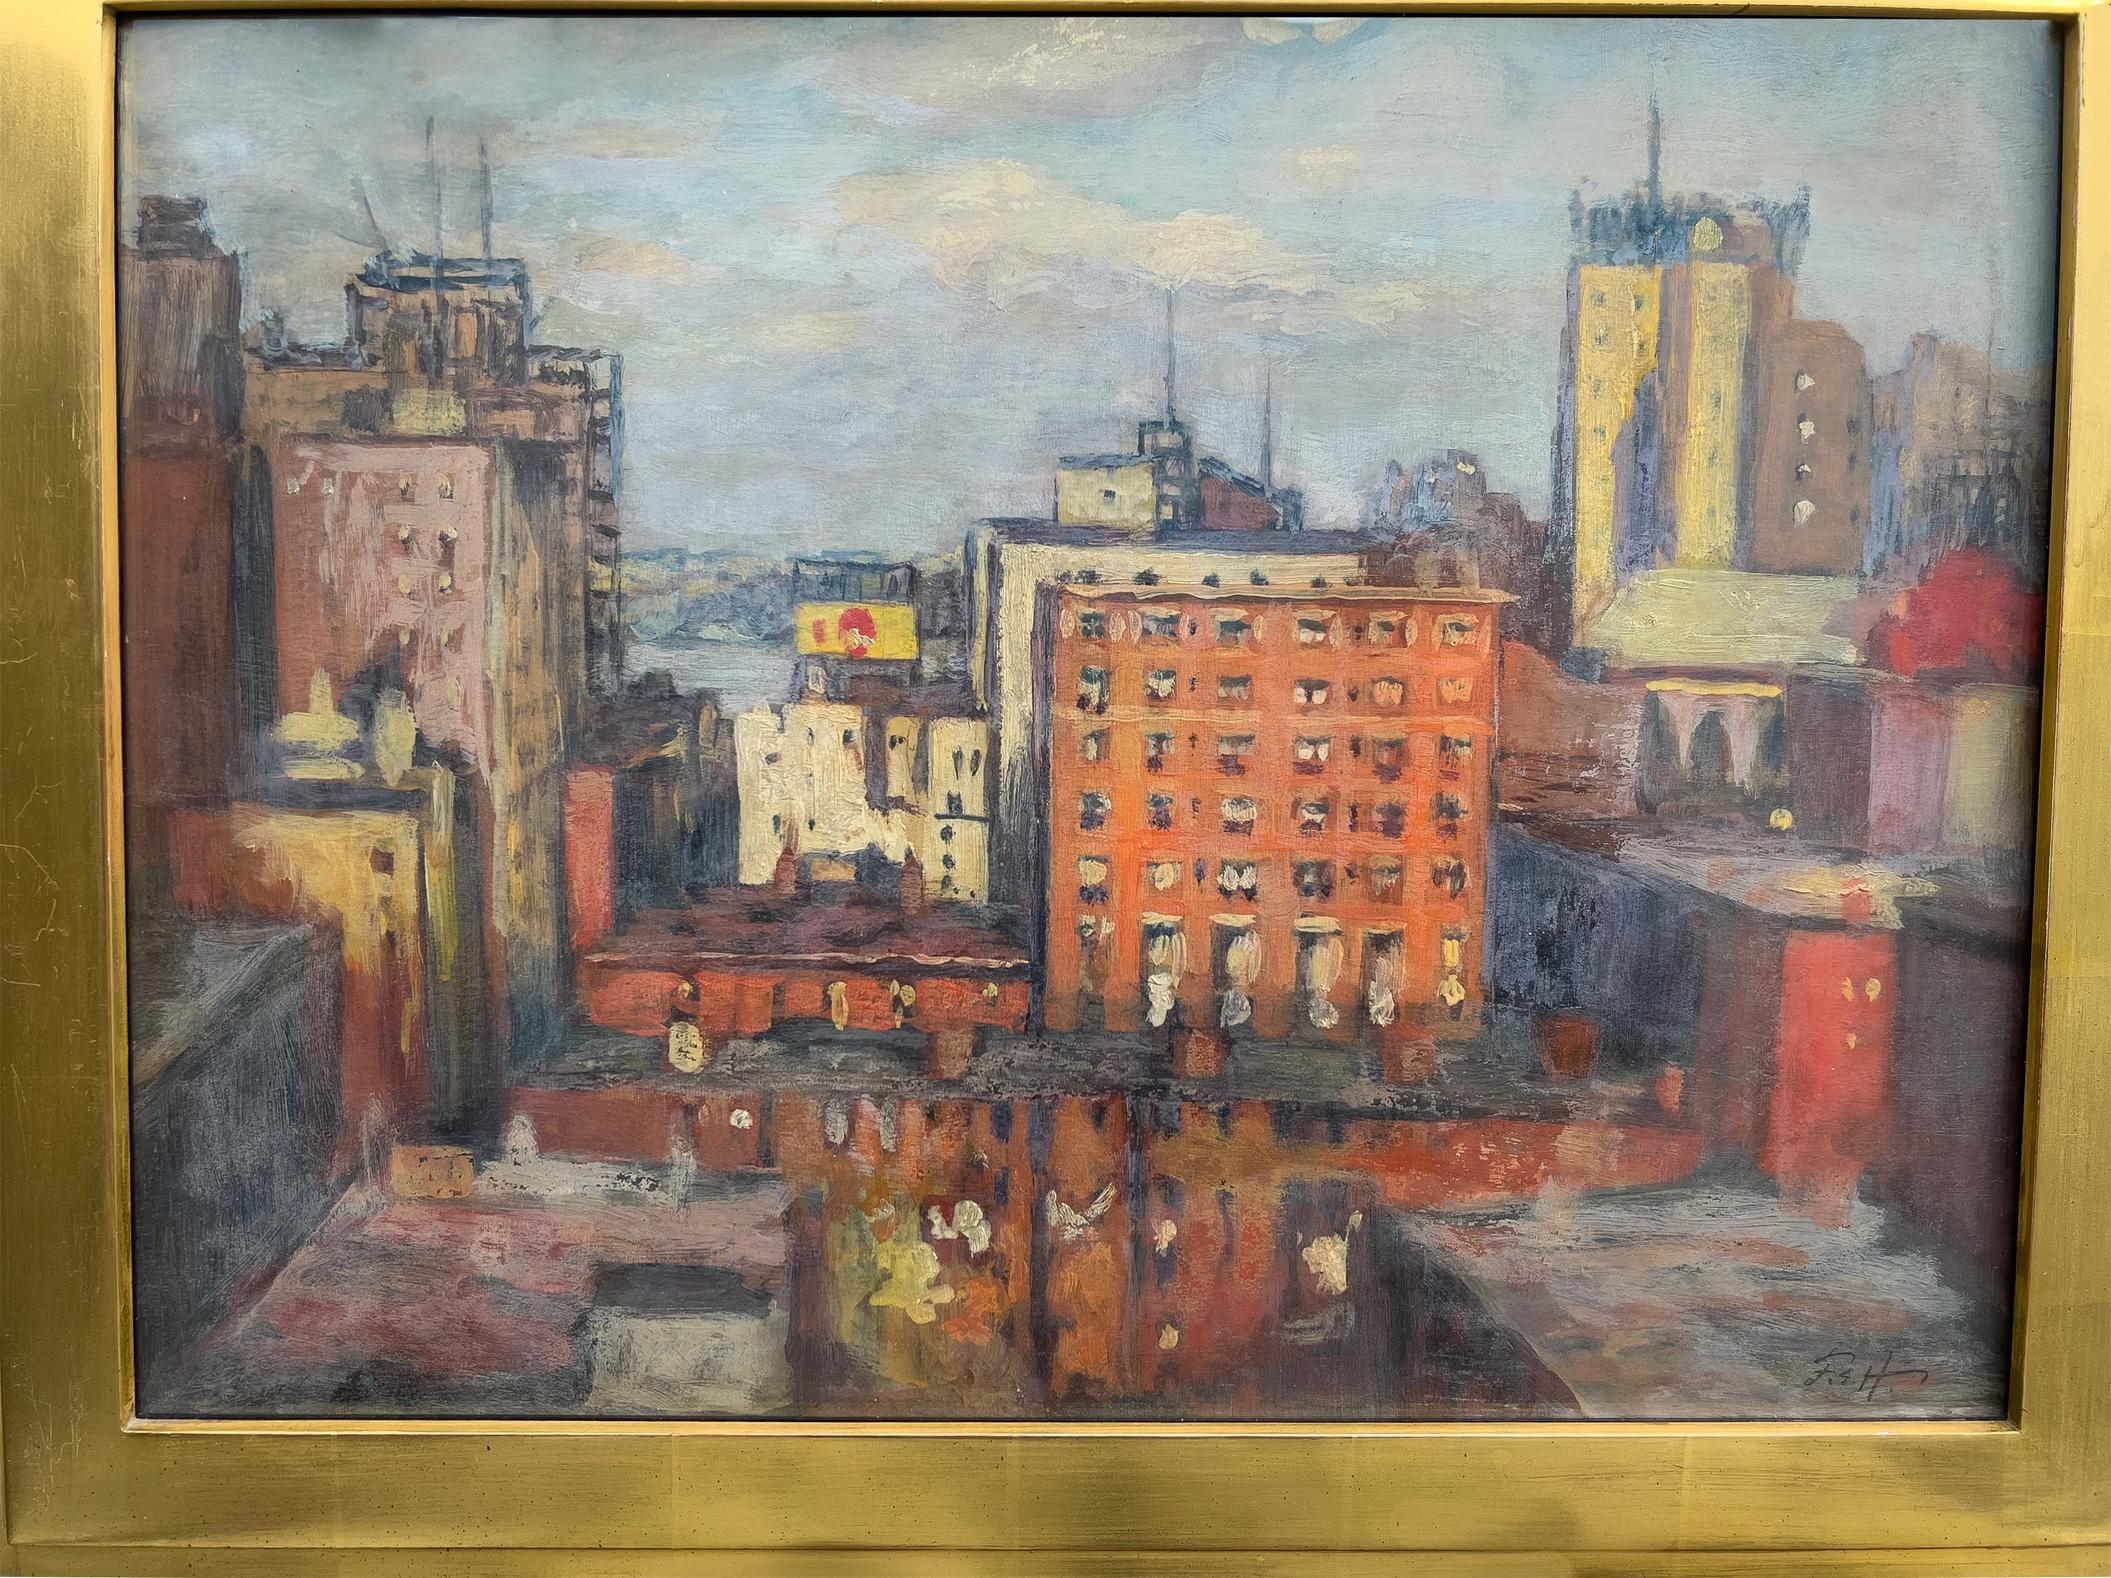 Rooftop view of the upper West Side Manhattan as it looked in the 1930s. There is a rough indication of a billboard and a glimpse of the Hudson River.  The cluster of buildings depicted function both as representation and abstraction painting.  